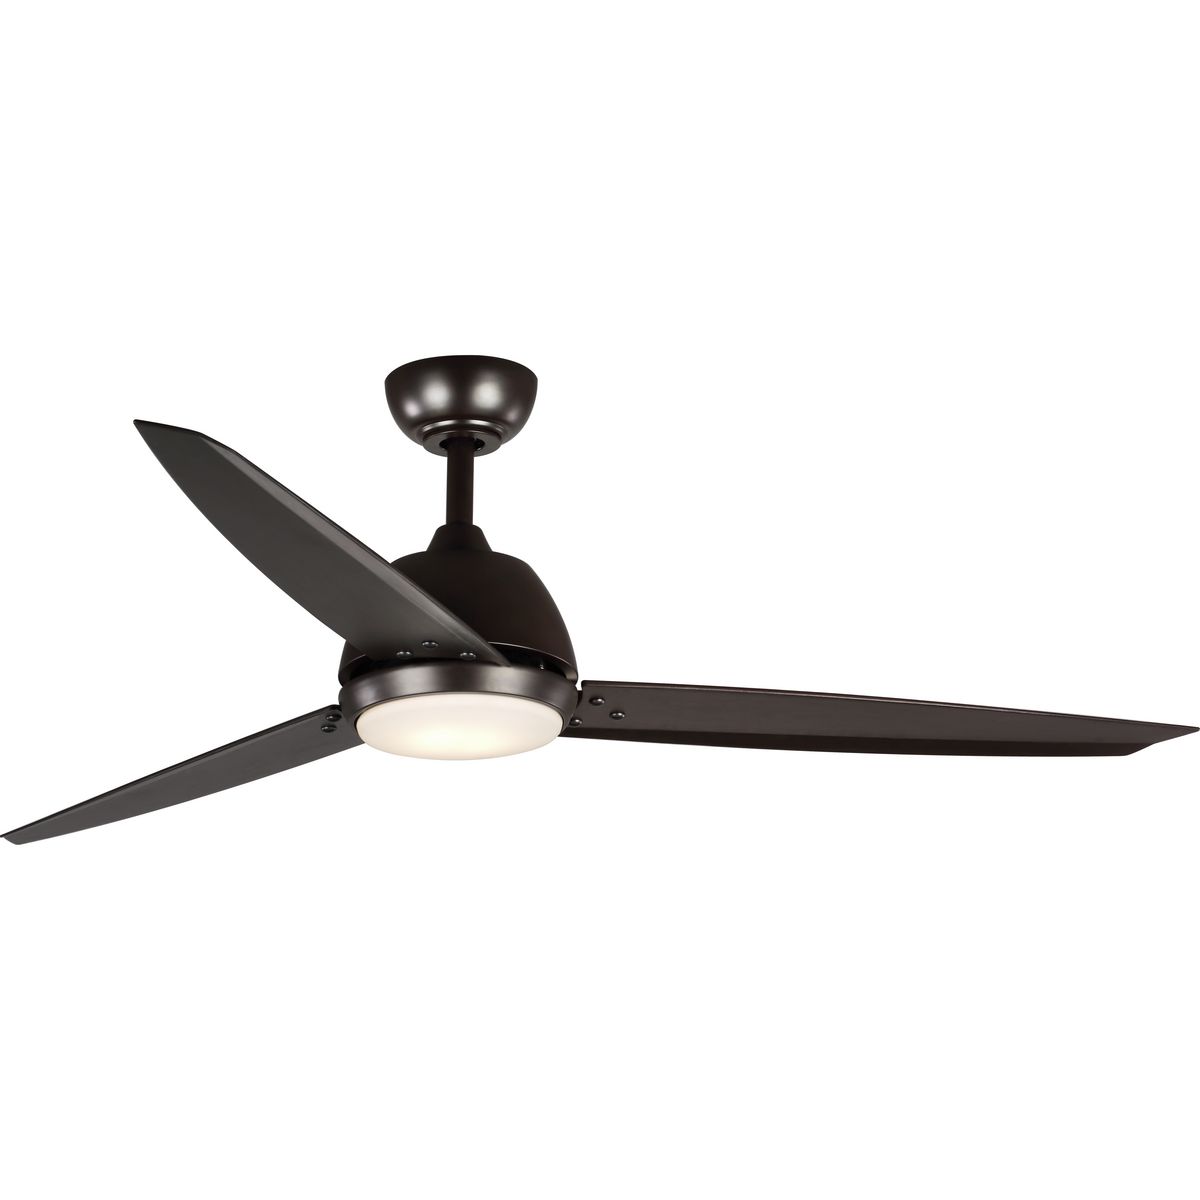 This 60 inch Oriole three-blade ceiling fan is the perfect addition to garages, industrial shops or commercial buildings to distribute the right amount of air and keep the space cool and comfortable. Oriole contains an integrated 18W LED module, with an optional finishing cap offering the user the choice to install with or without the light kit. A remote control is included. A blank off plate comes standard.  Rich Architectural Bronze finish.